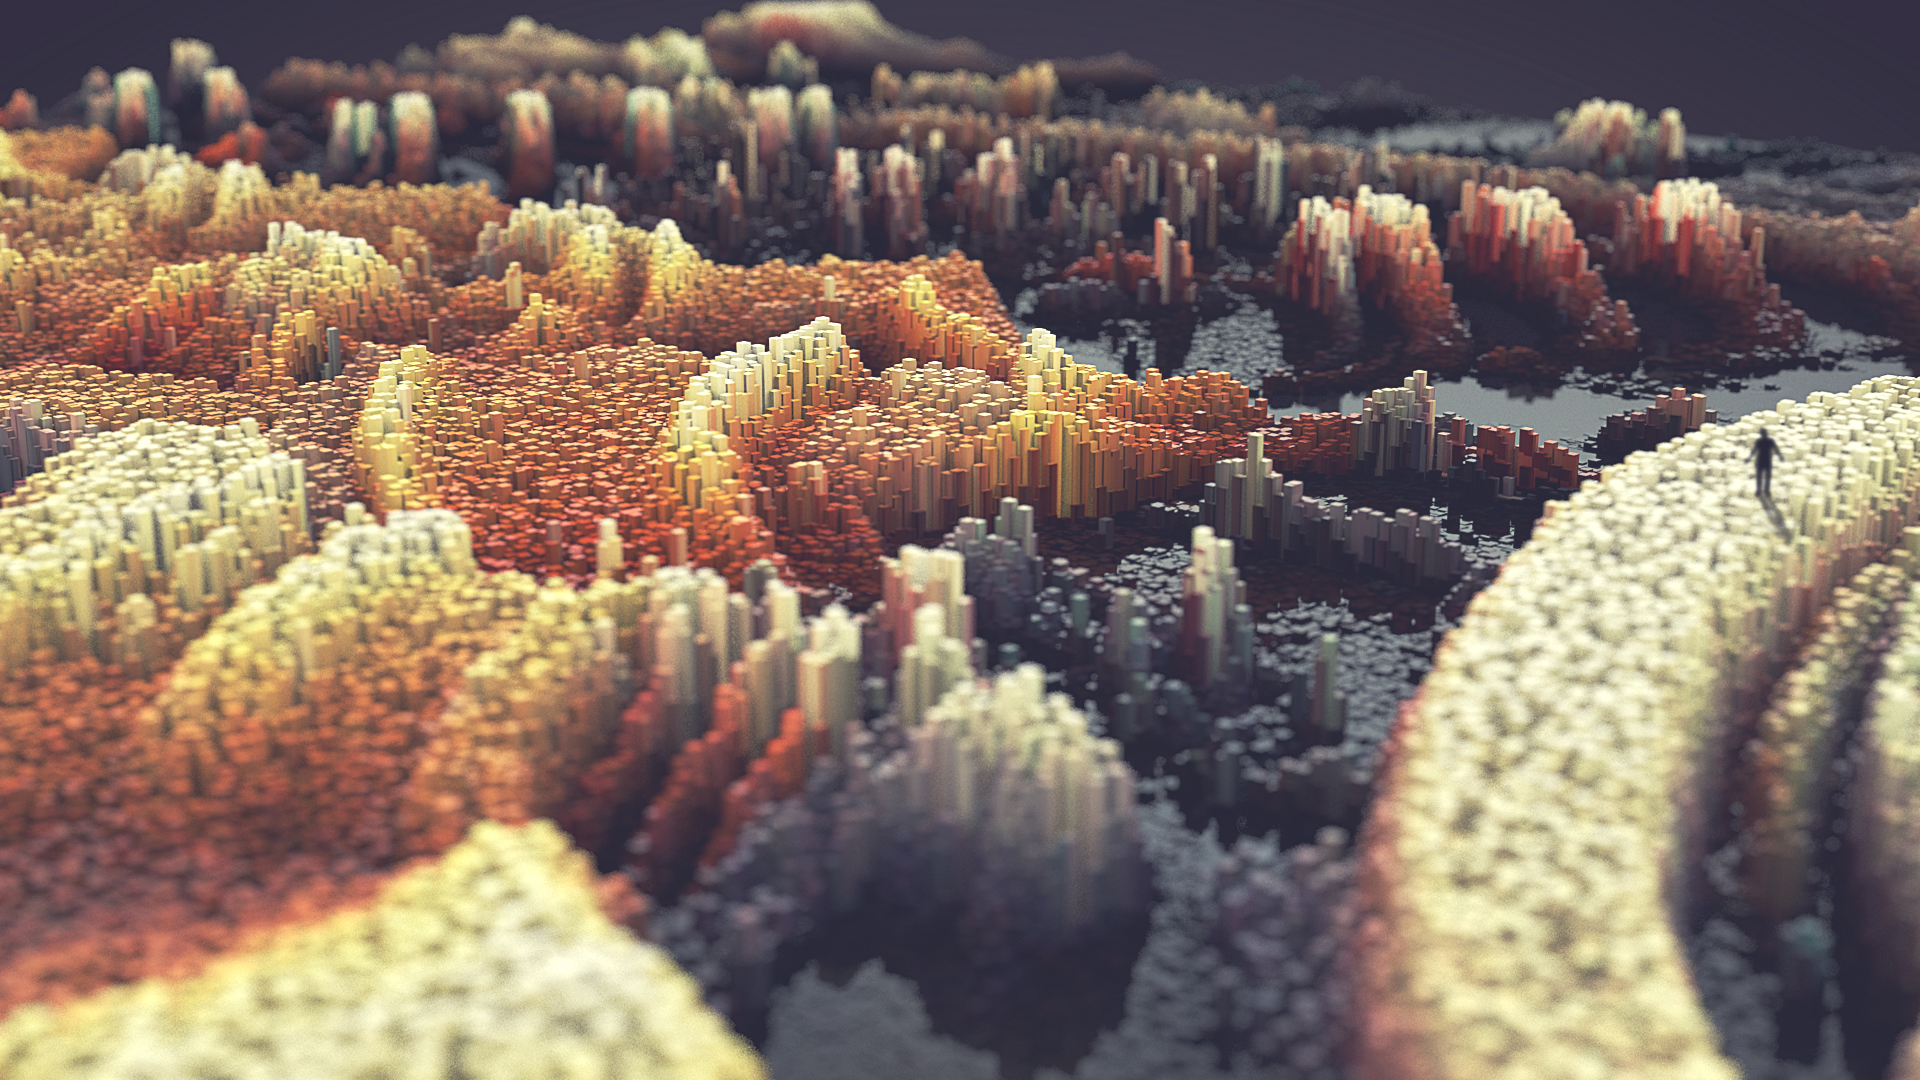 Planet Topography I // 10.18.15